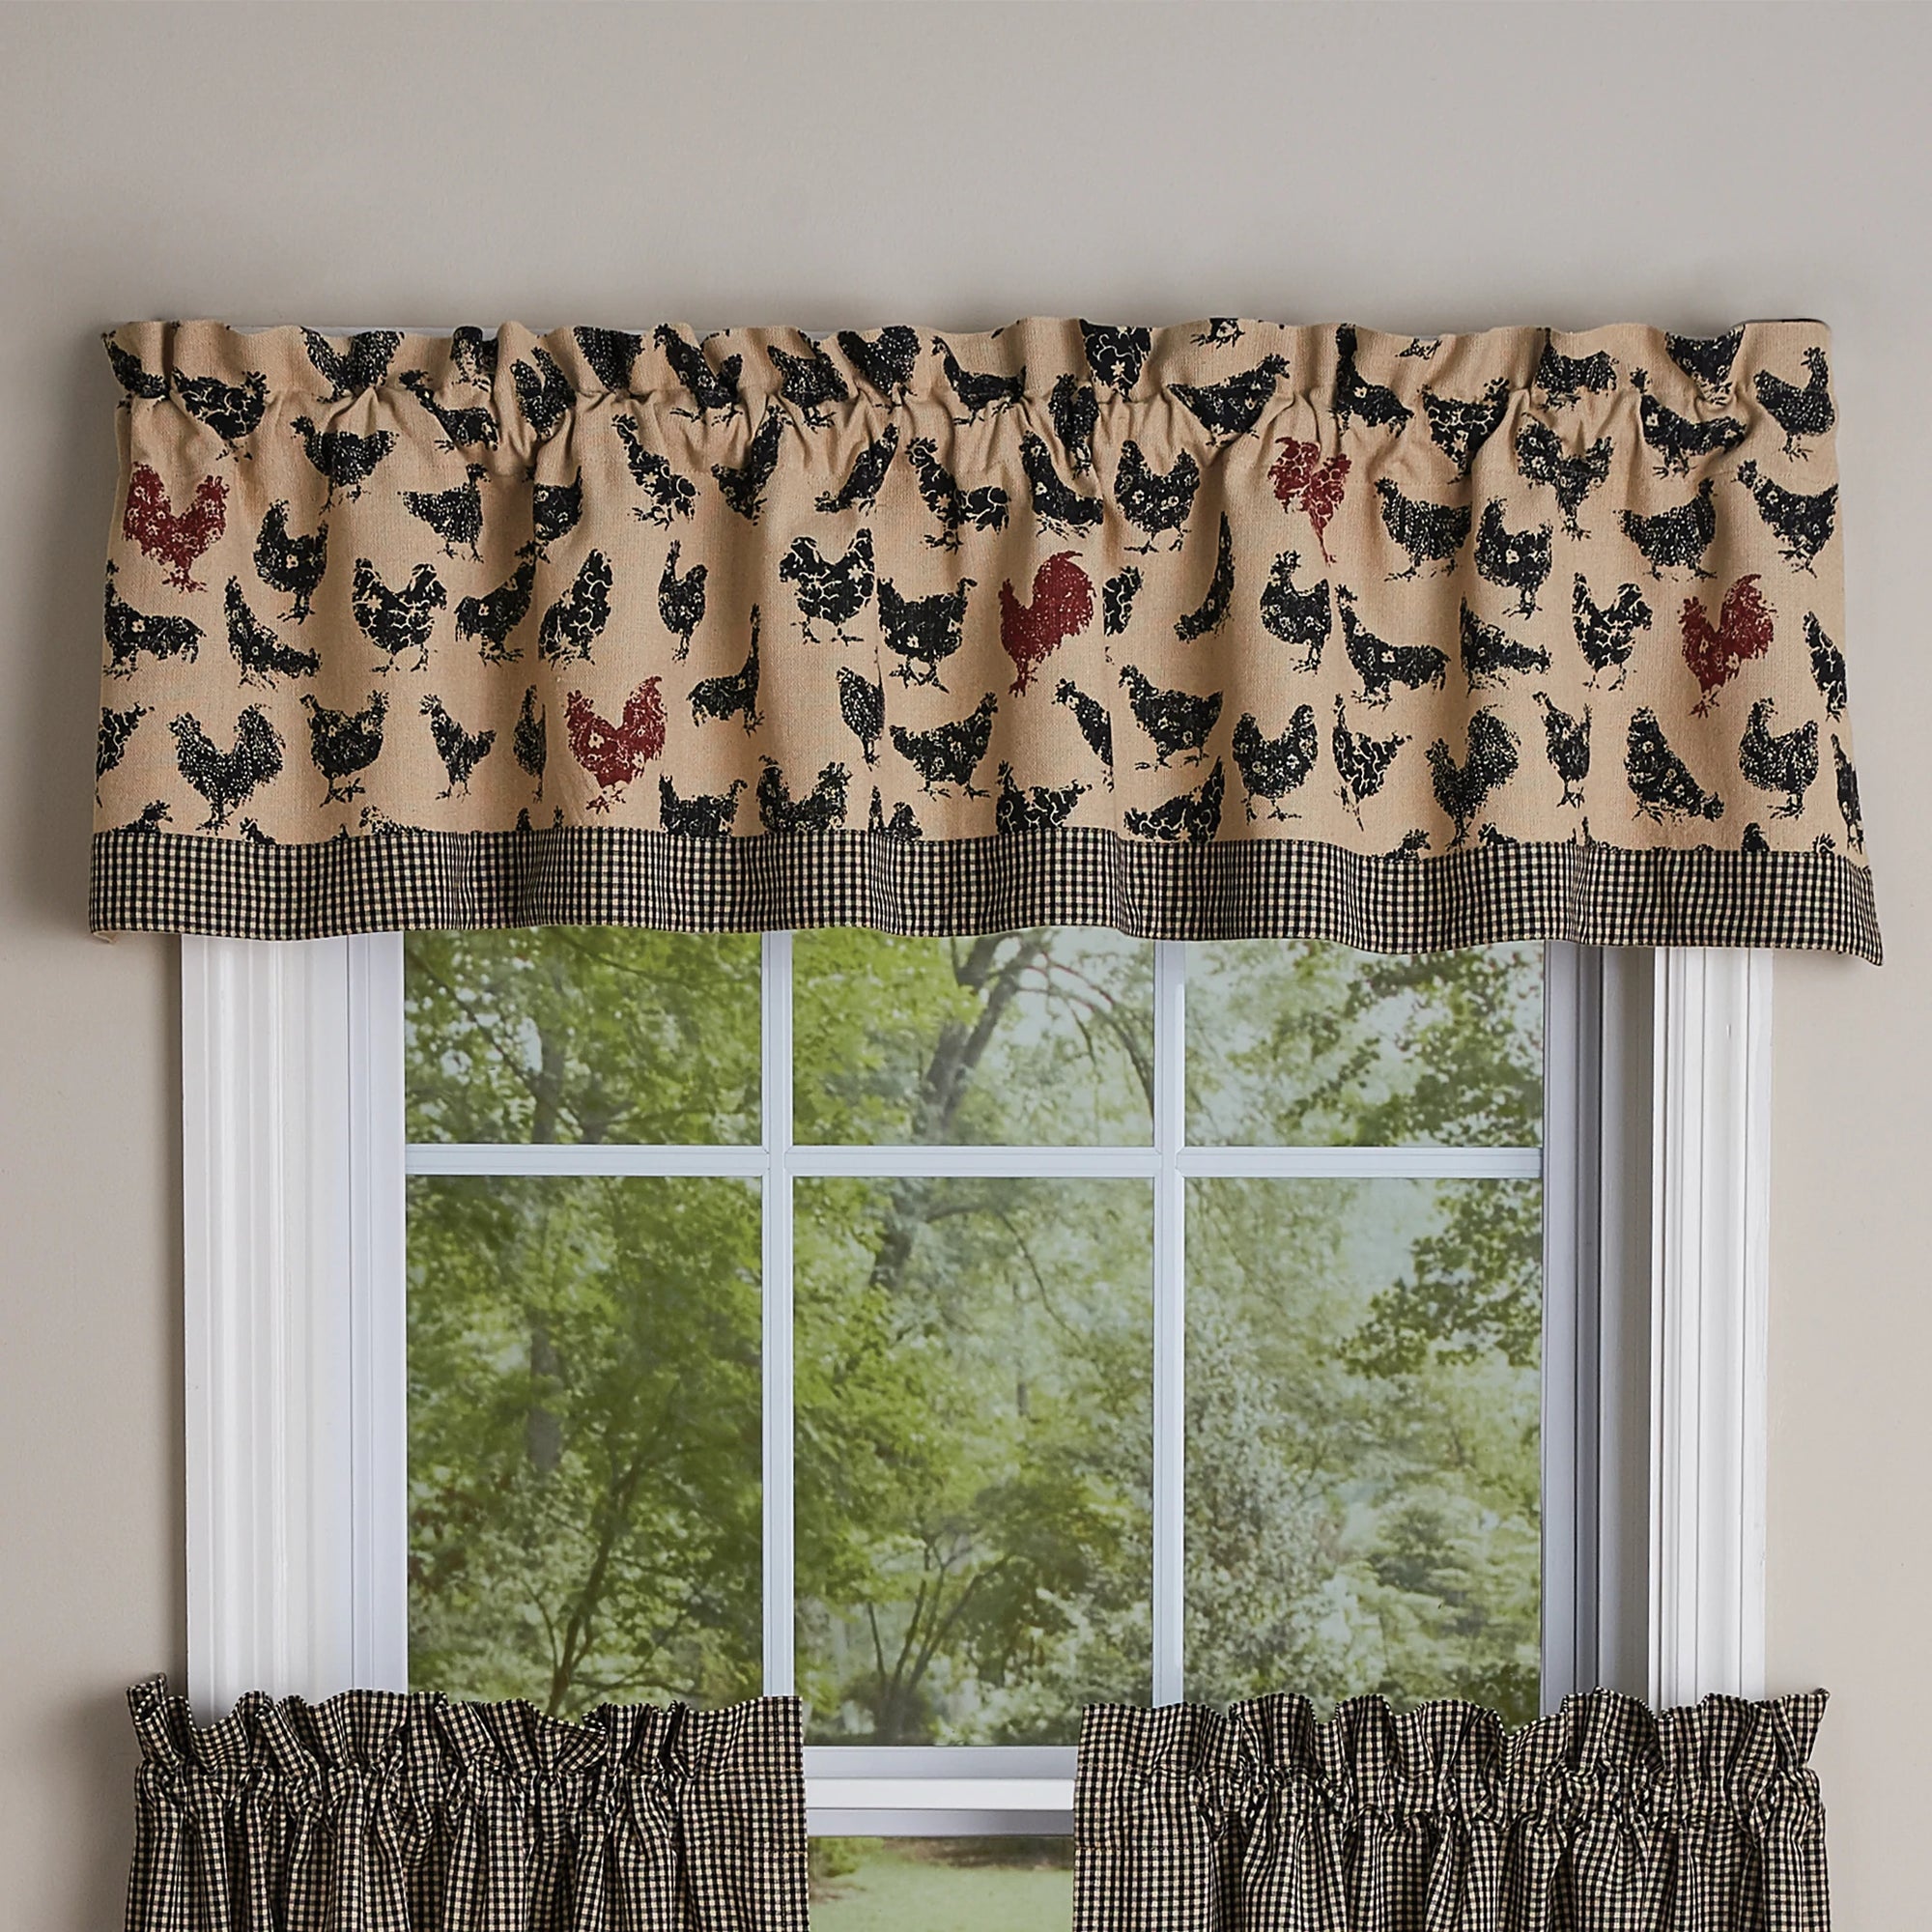 Hen Pecked Hens Valance Curtains